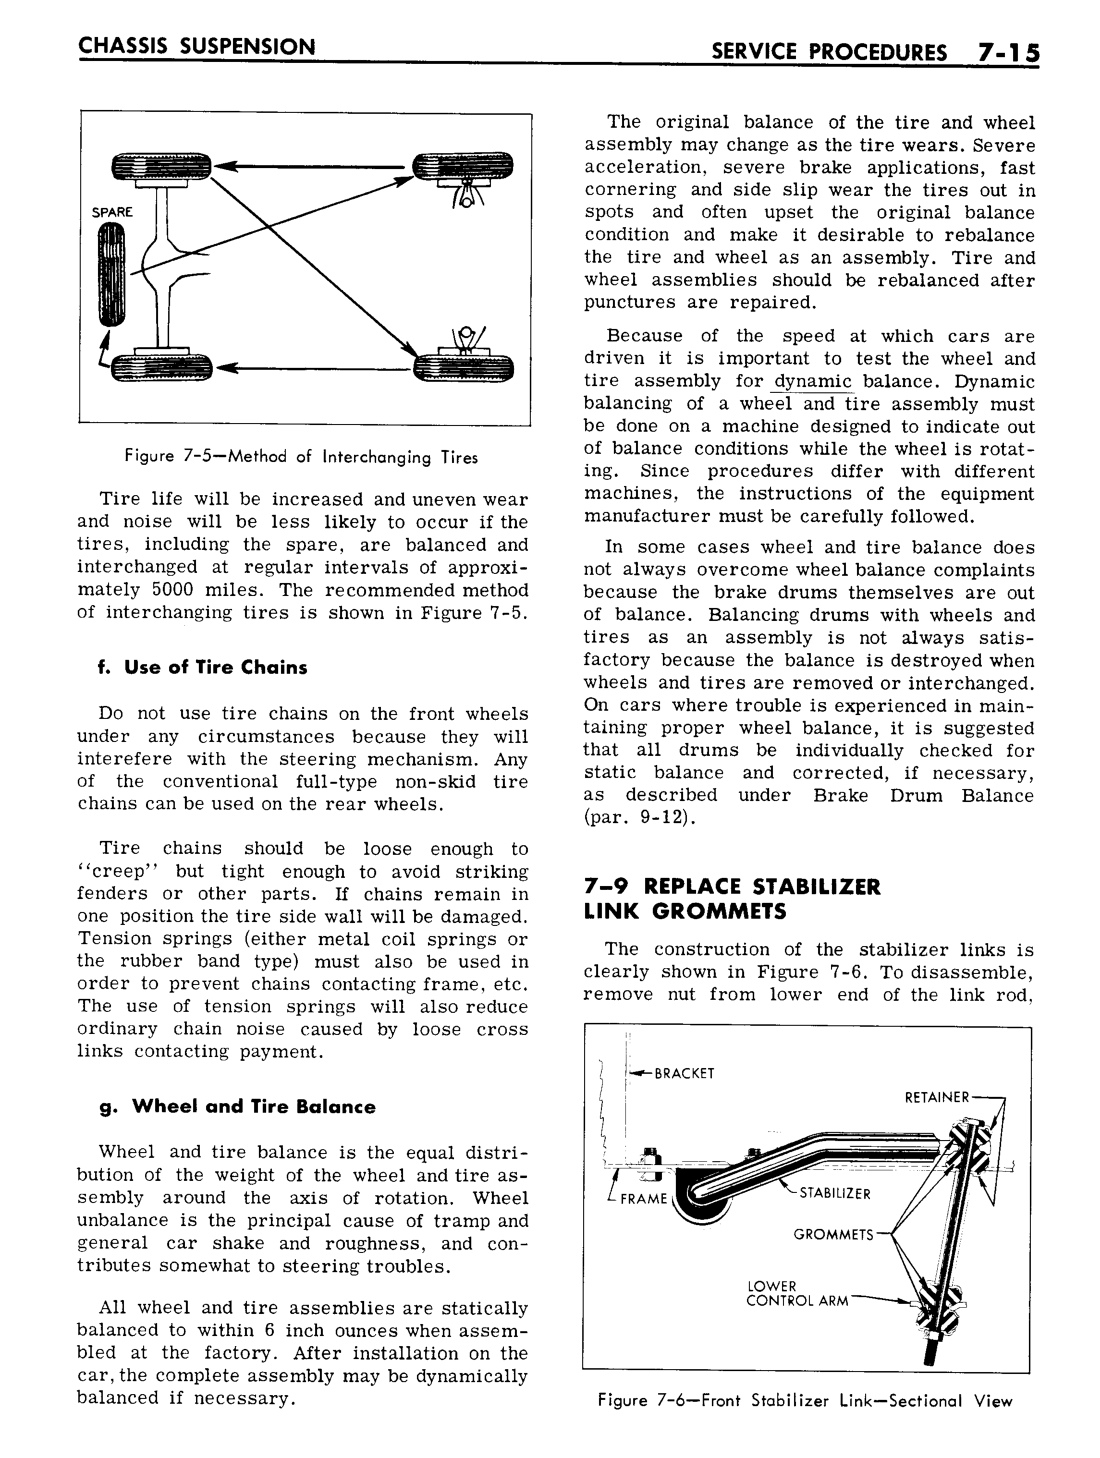 n_07 1961 Buick Shop Manual - Chassis Suspension-015-015.jpg